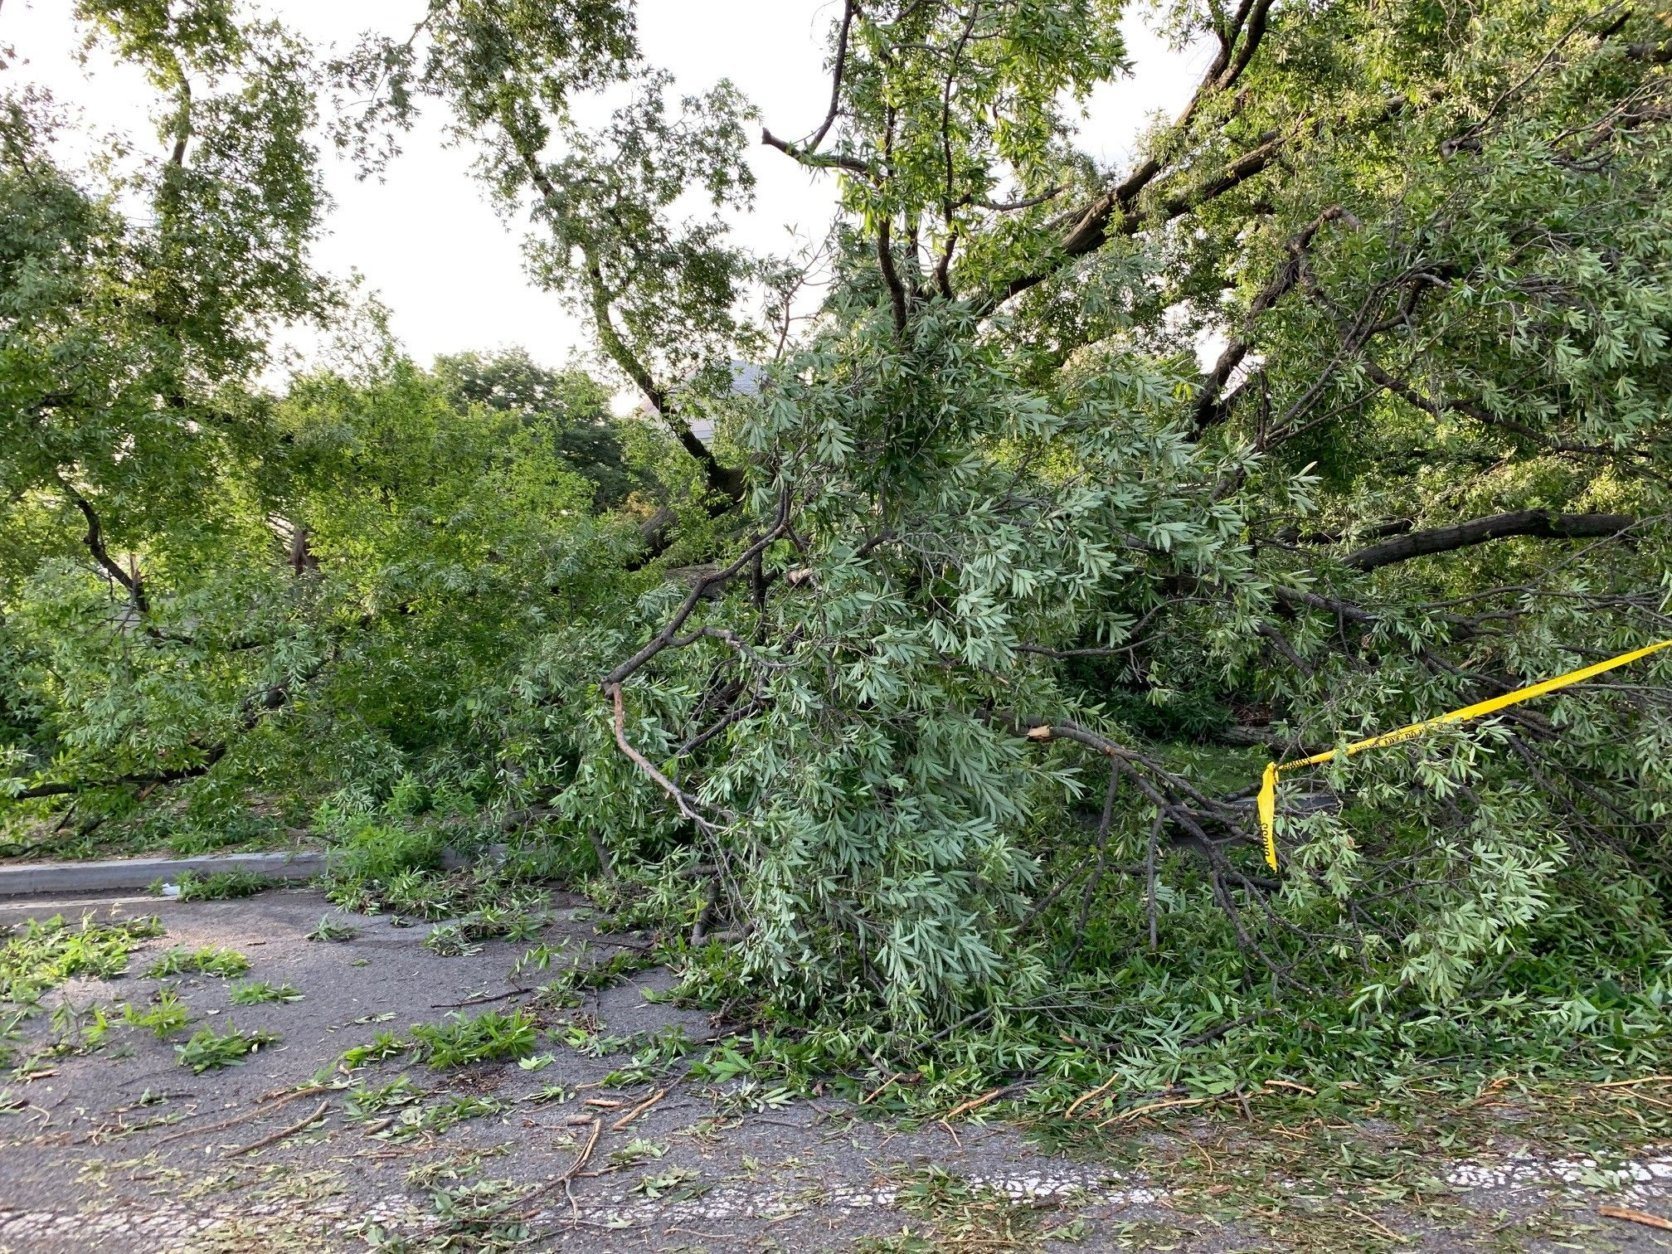 Downed trees block the sidewalk near the Jefferson Memorial in D.C. after a storm on Thursday, May 23, 2019. (WTOP/Dan Friedell)